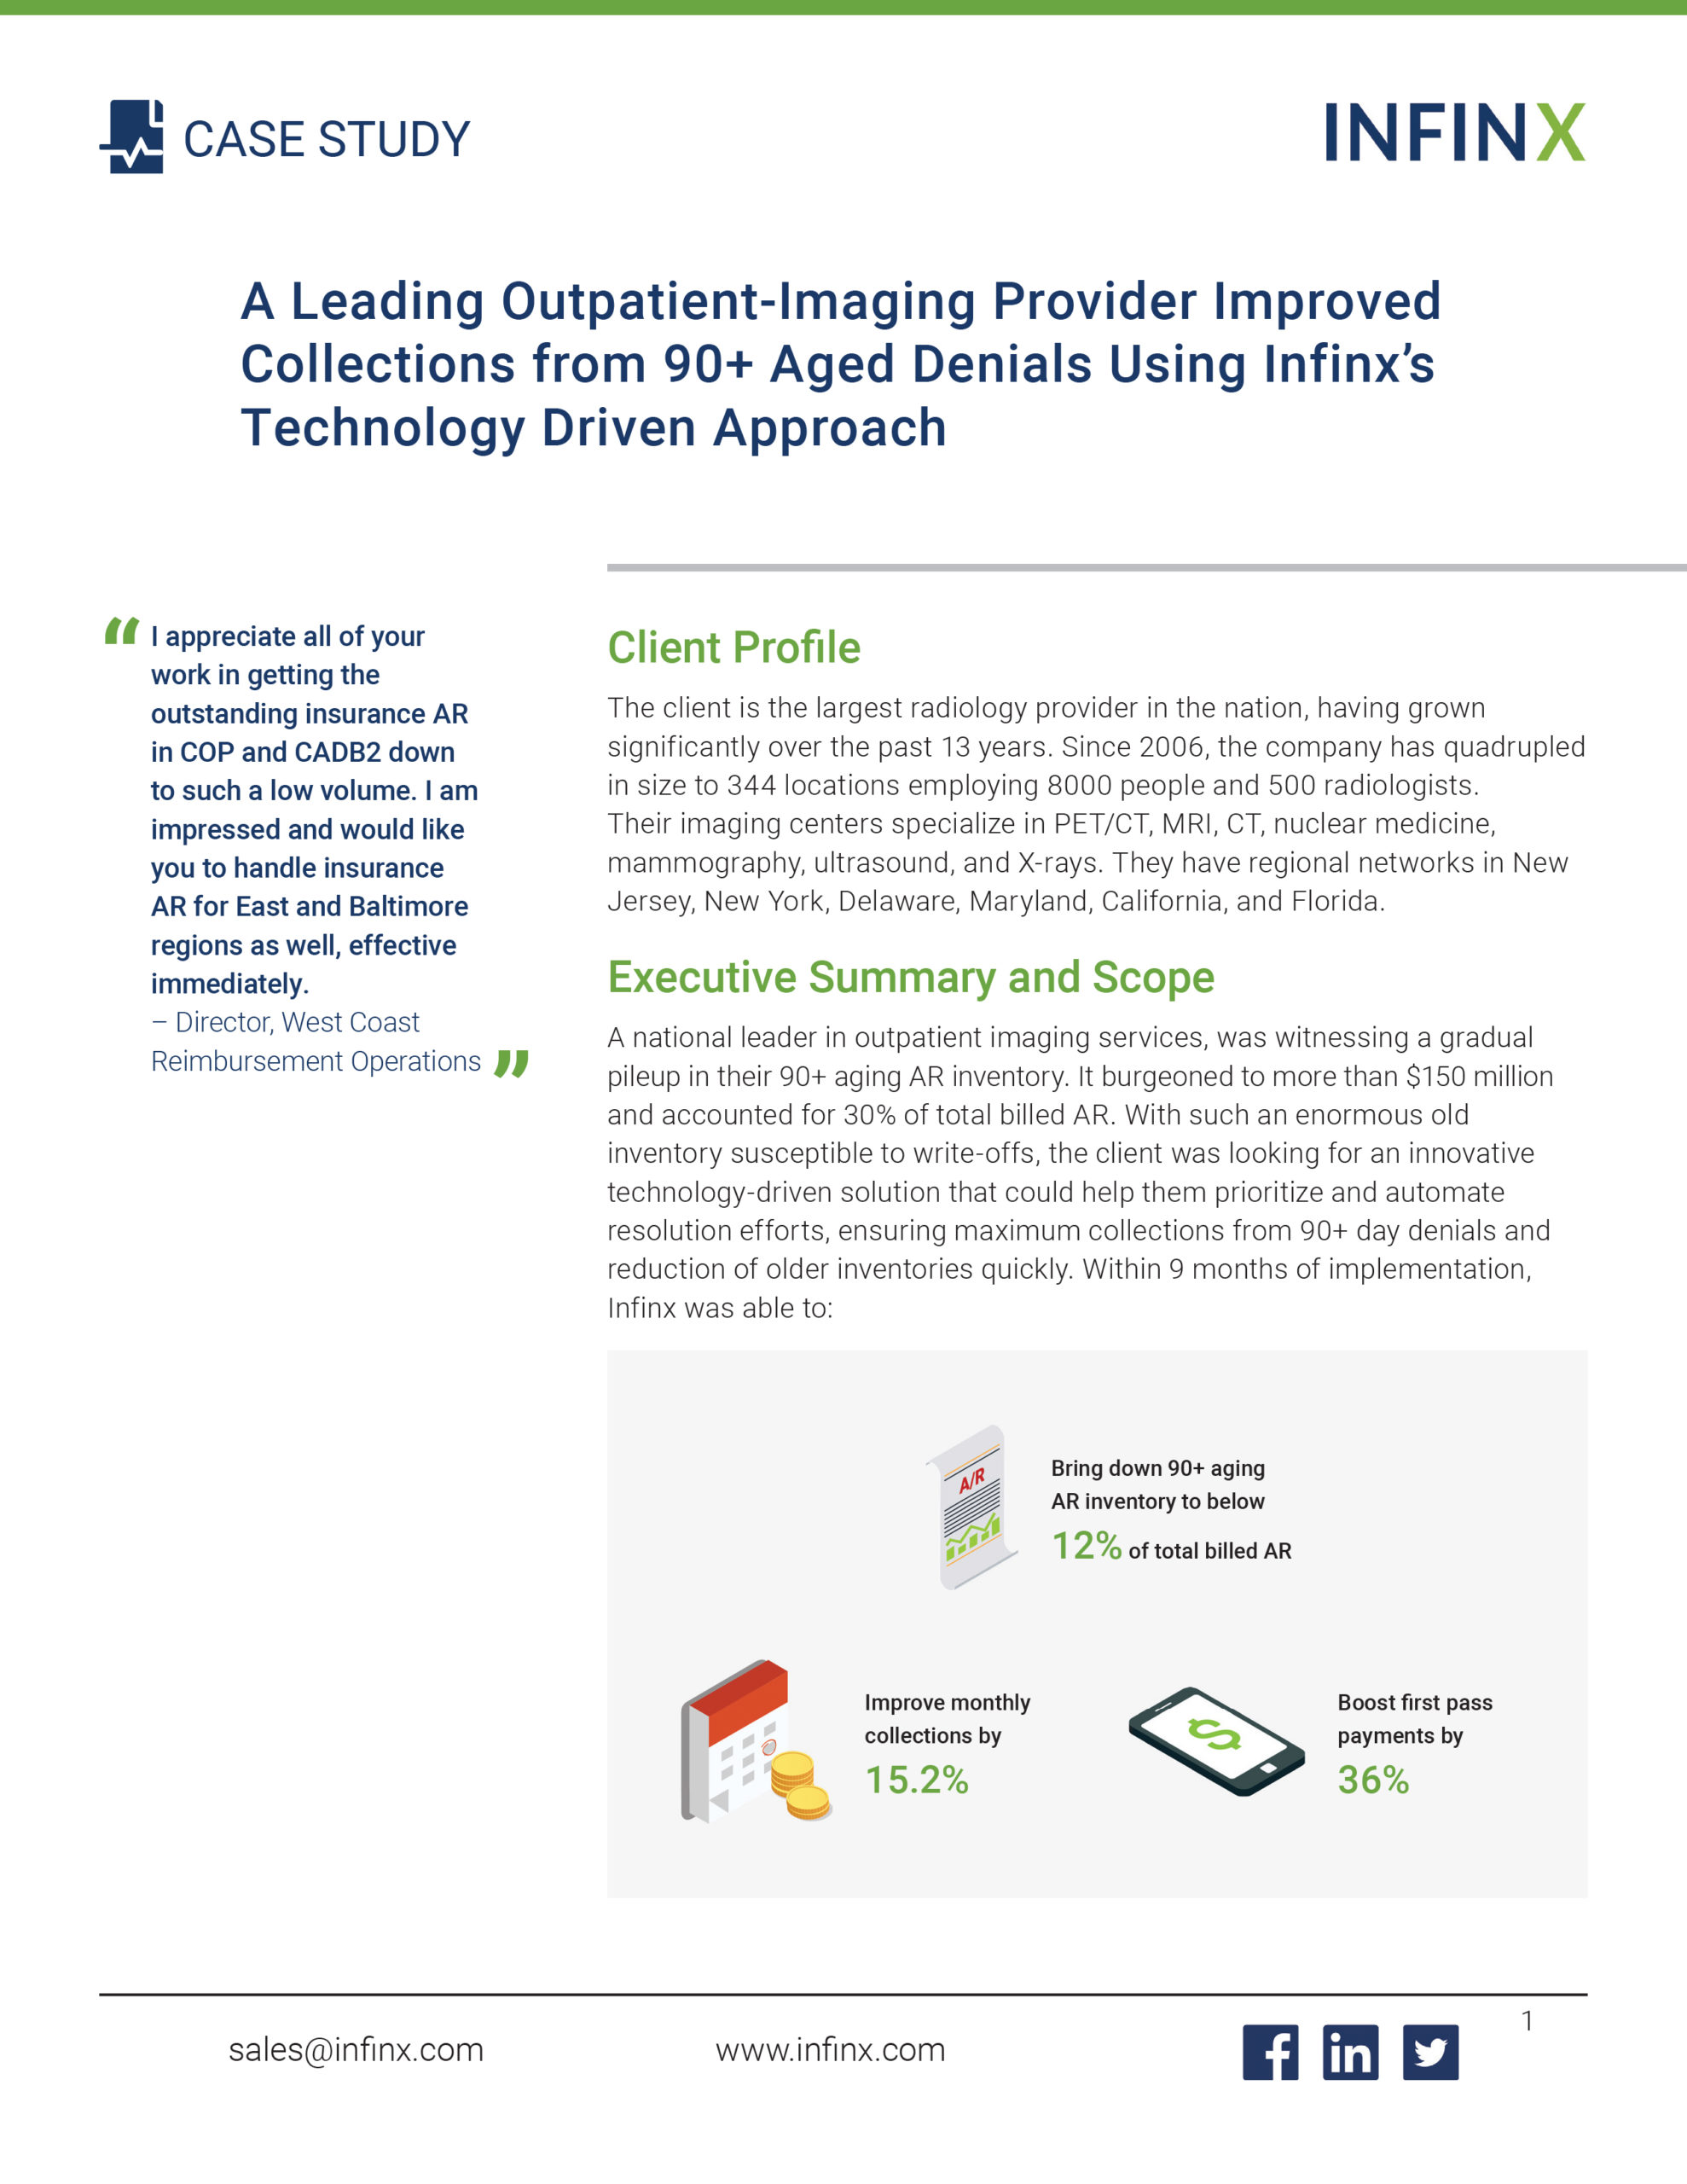 Infinx-Case-Study-A Leading Outpatient-Imaging Provider Improved